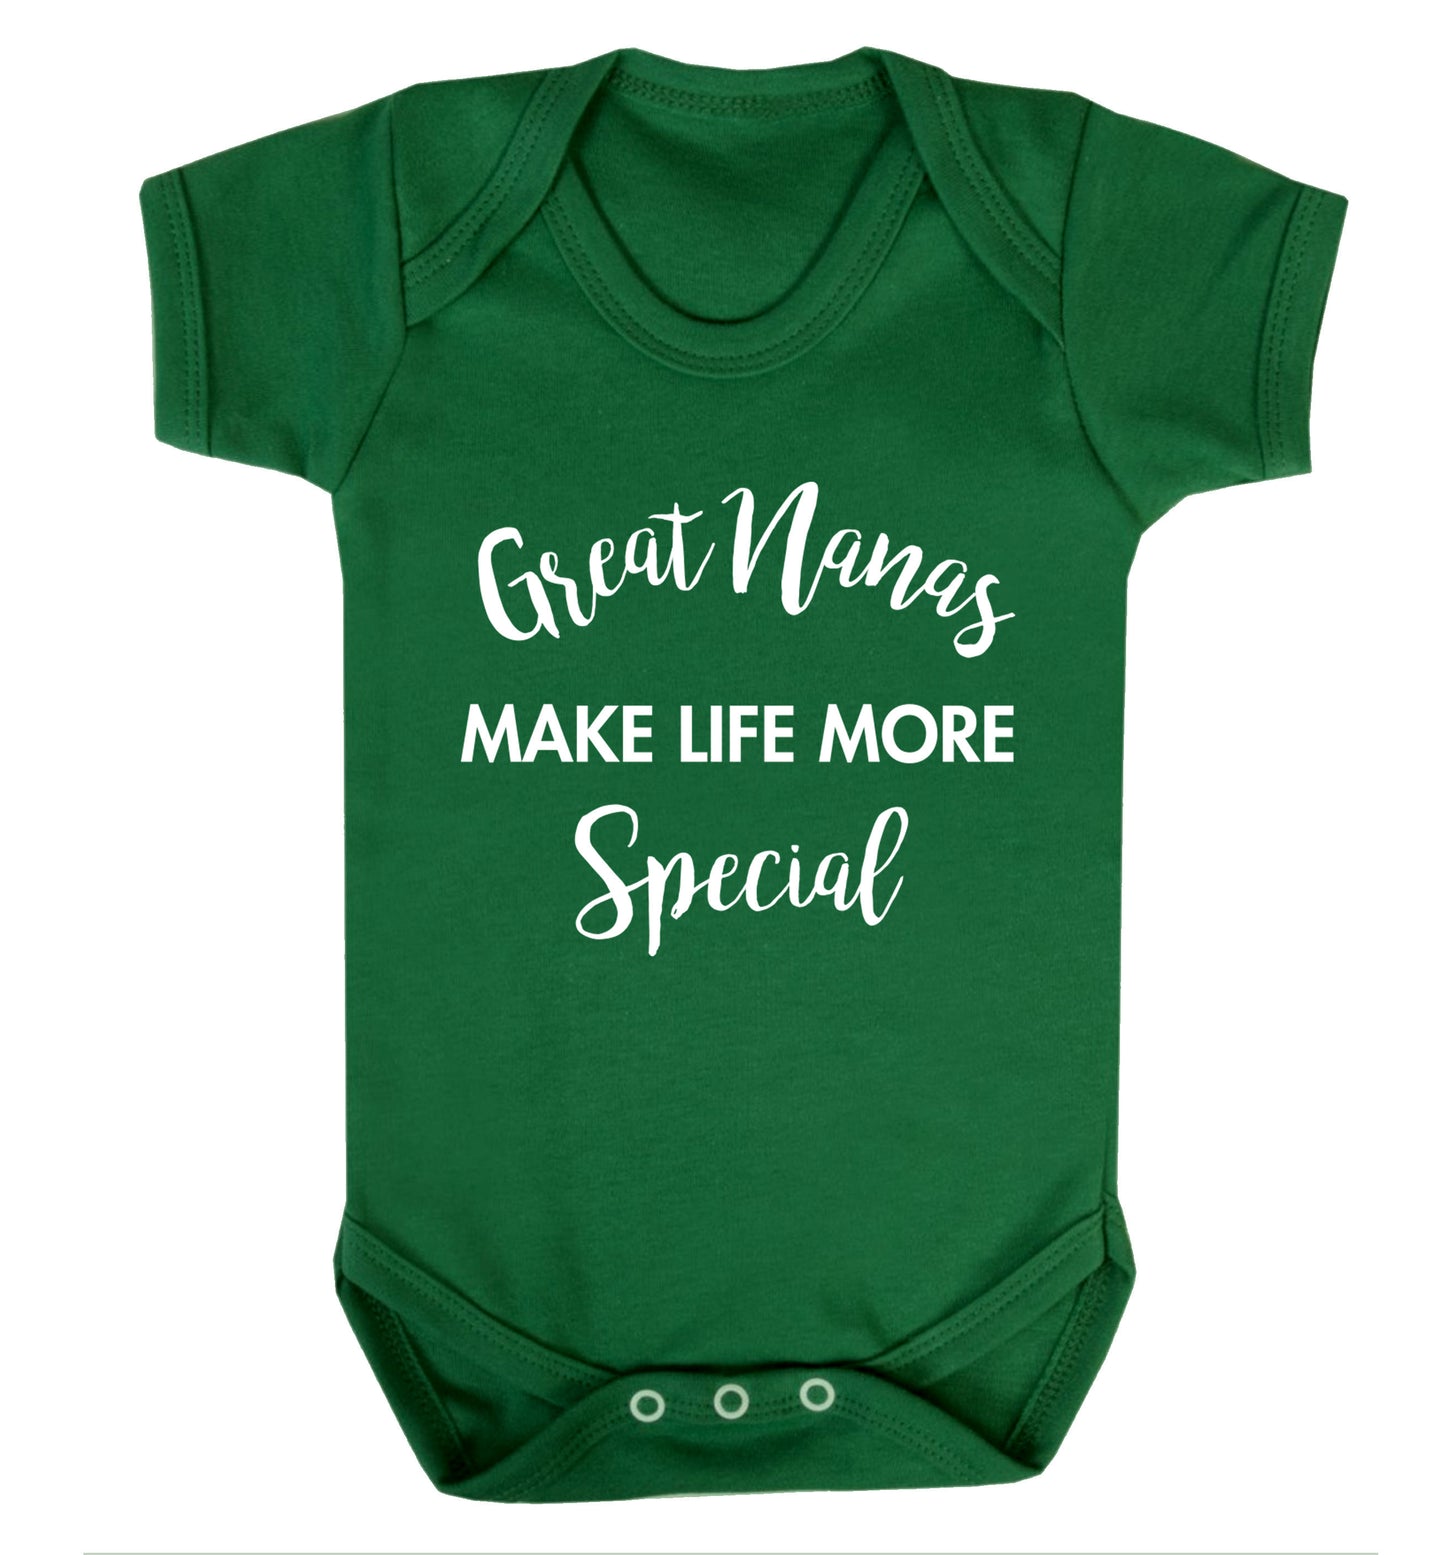 Great nanas make life more special Baby Vest green 18-24 months